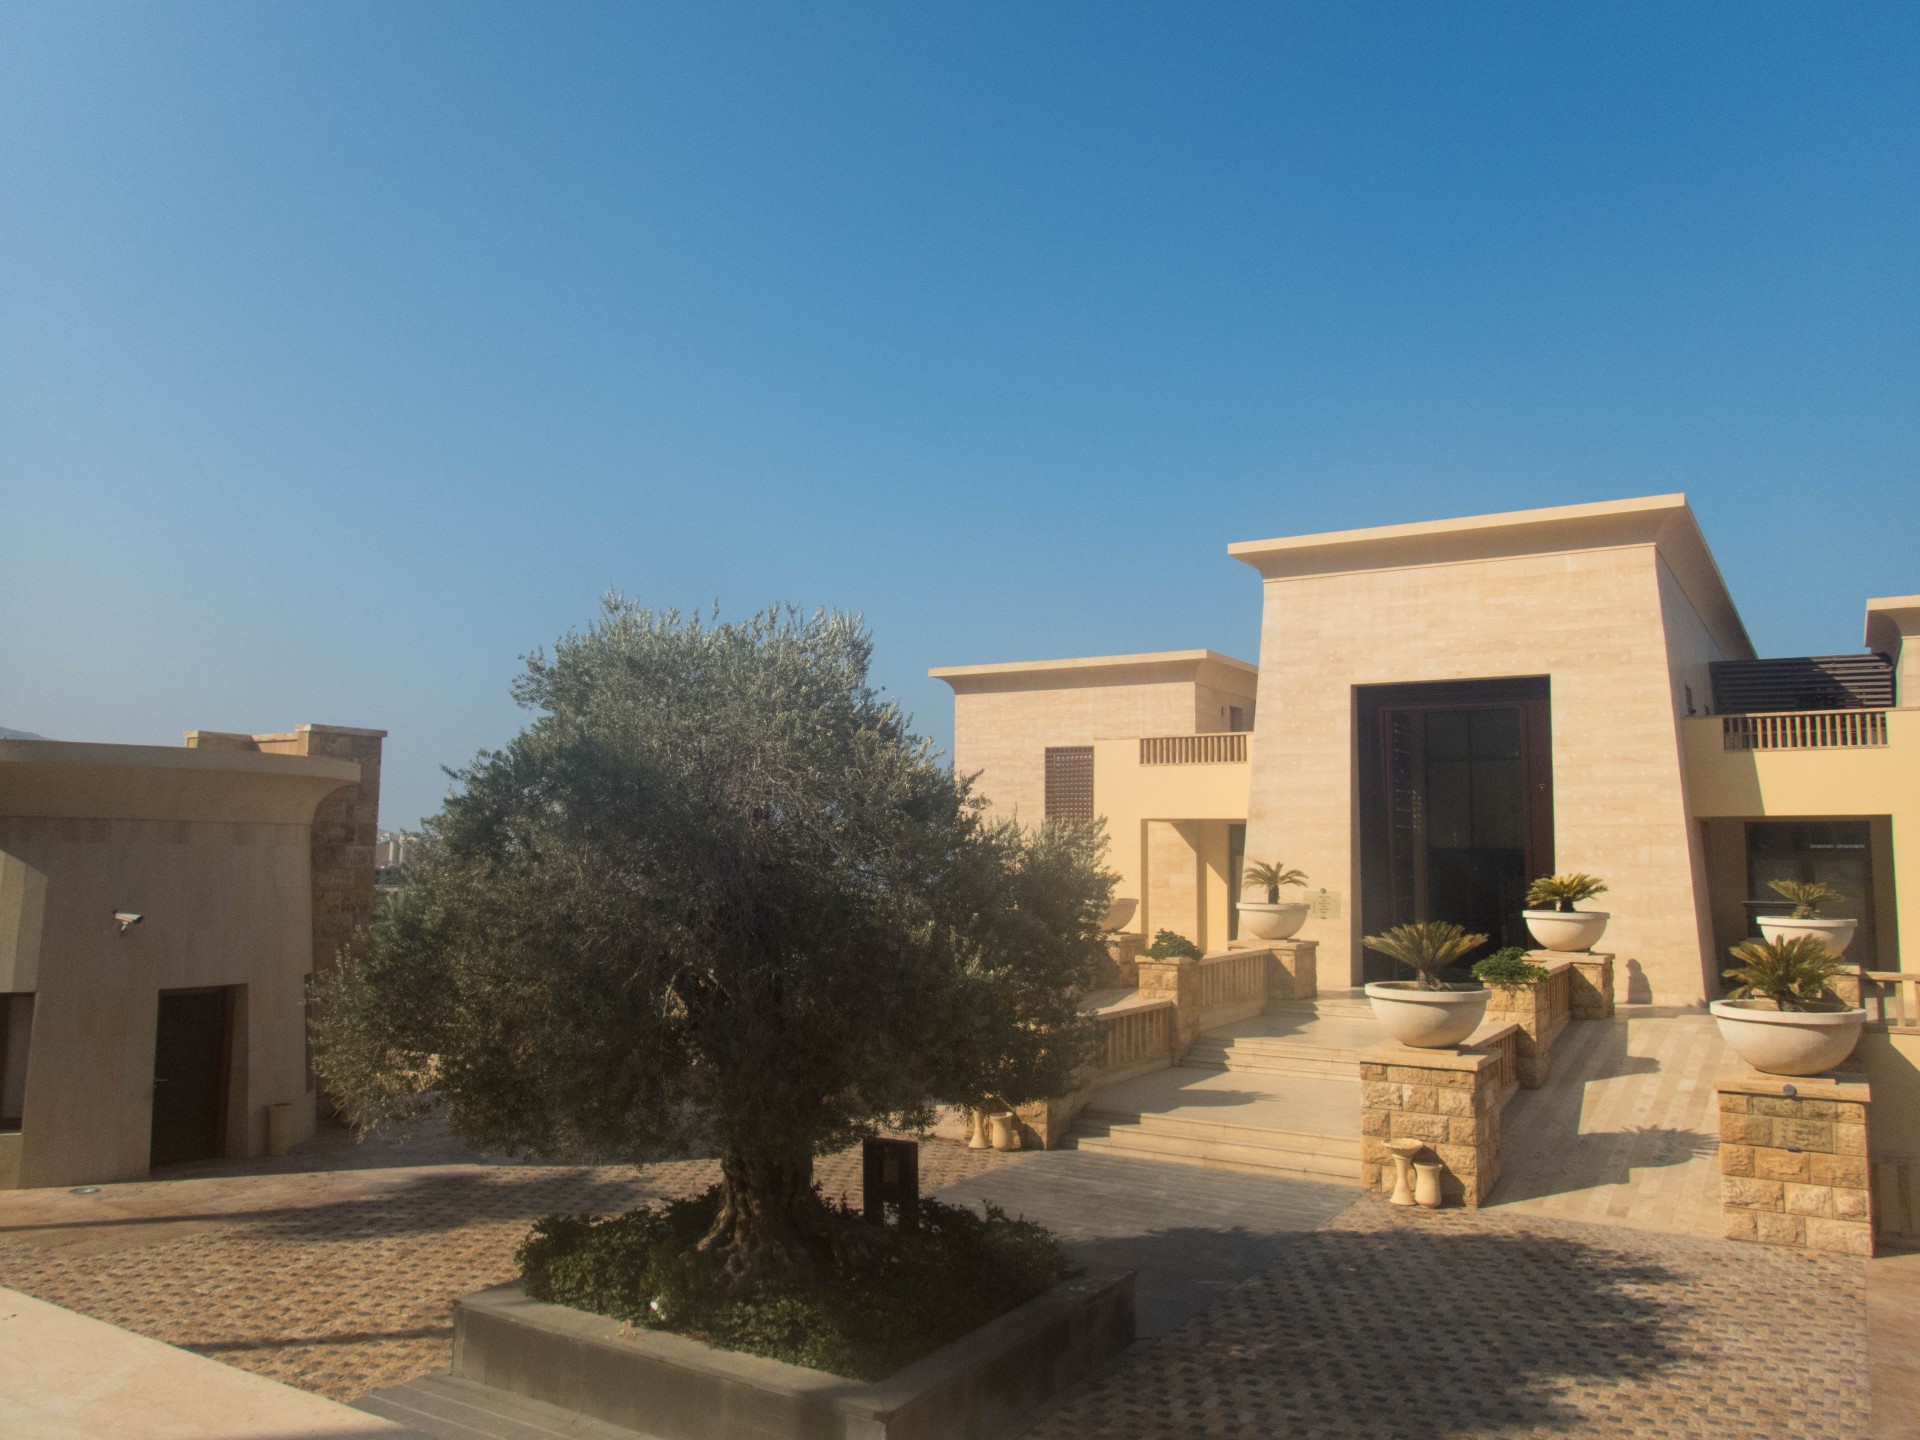 Sand coloured buildings under a blue sky with a large olive tree at the centre.